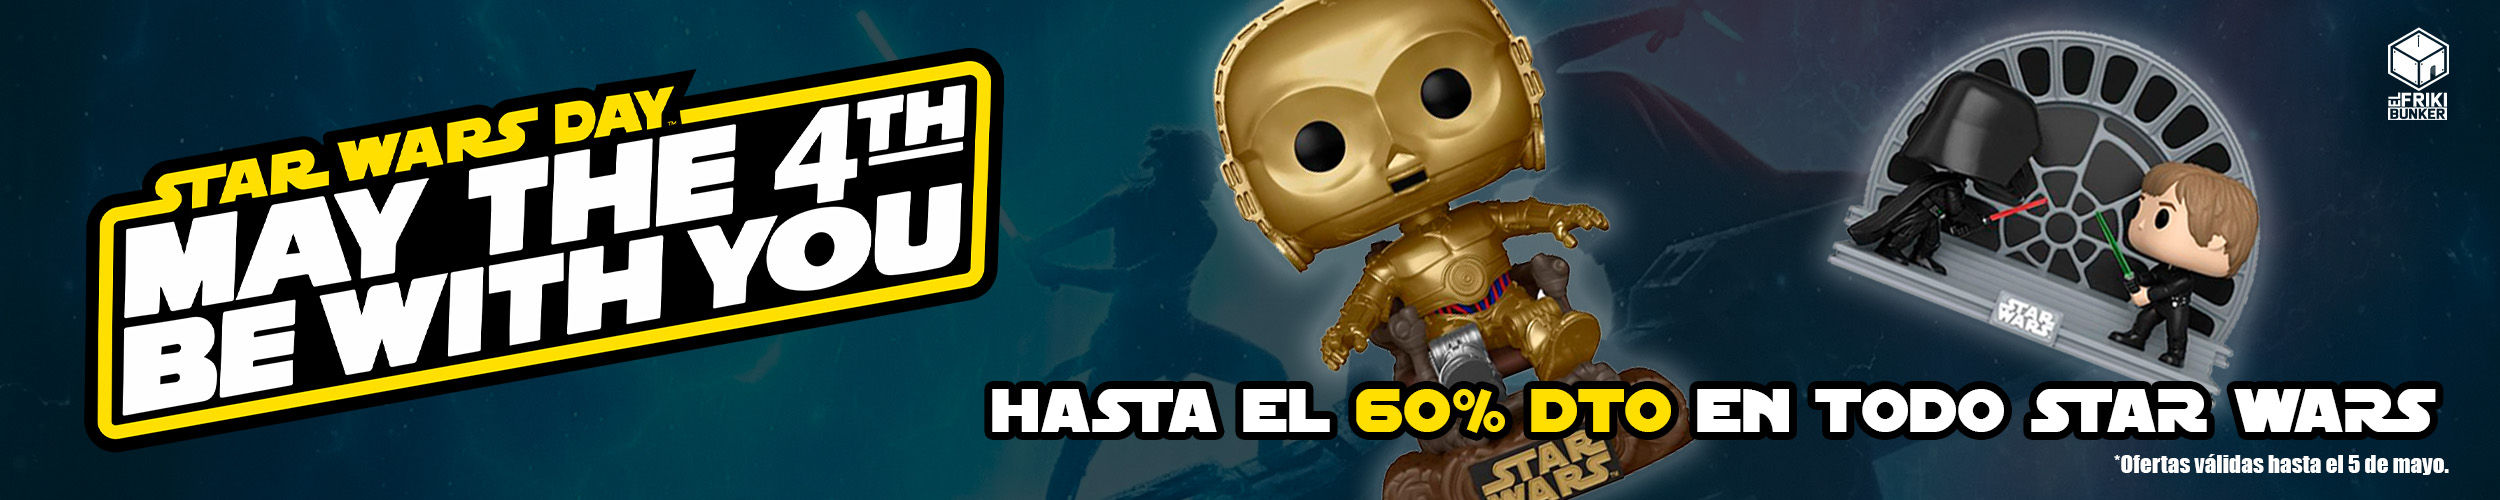 Ofertas May the 4th